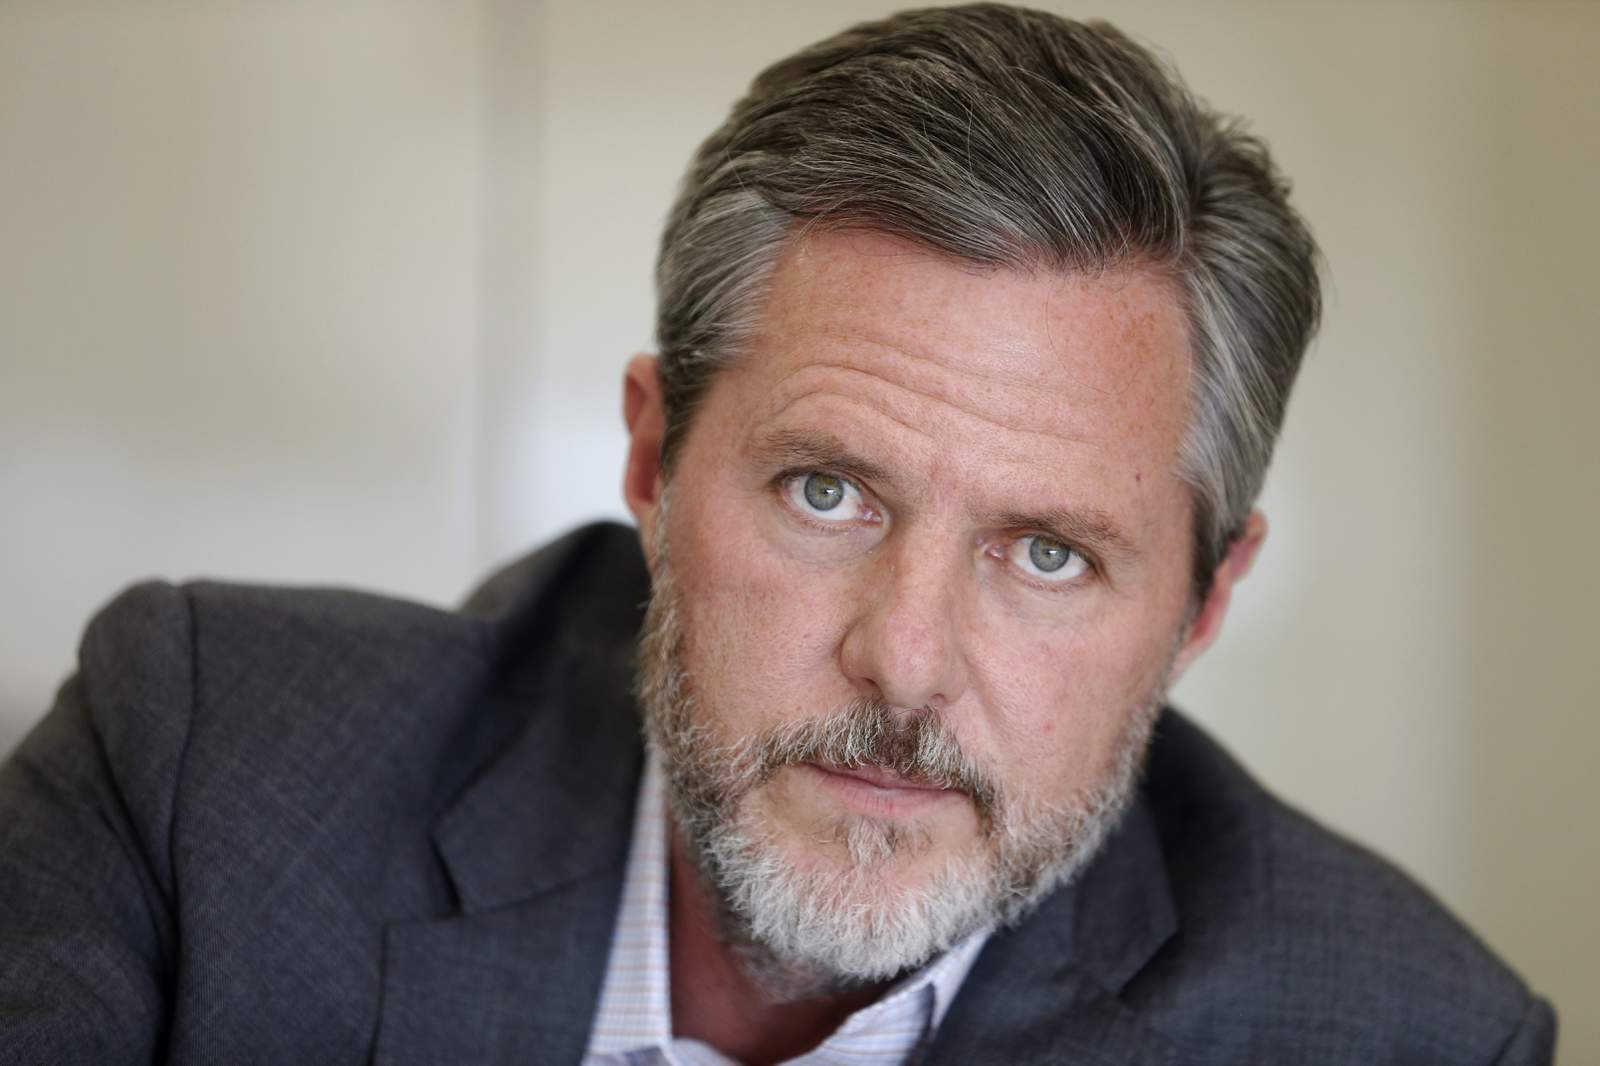 Liberty disputes reports about Falwell severance payment